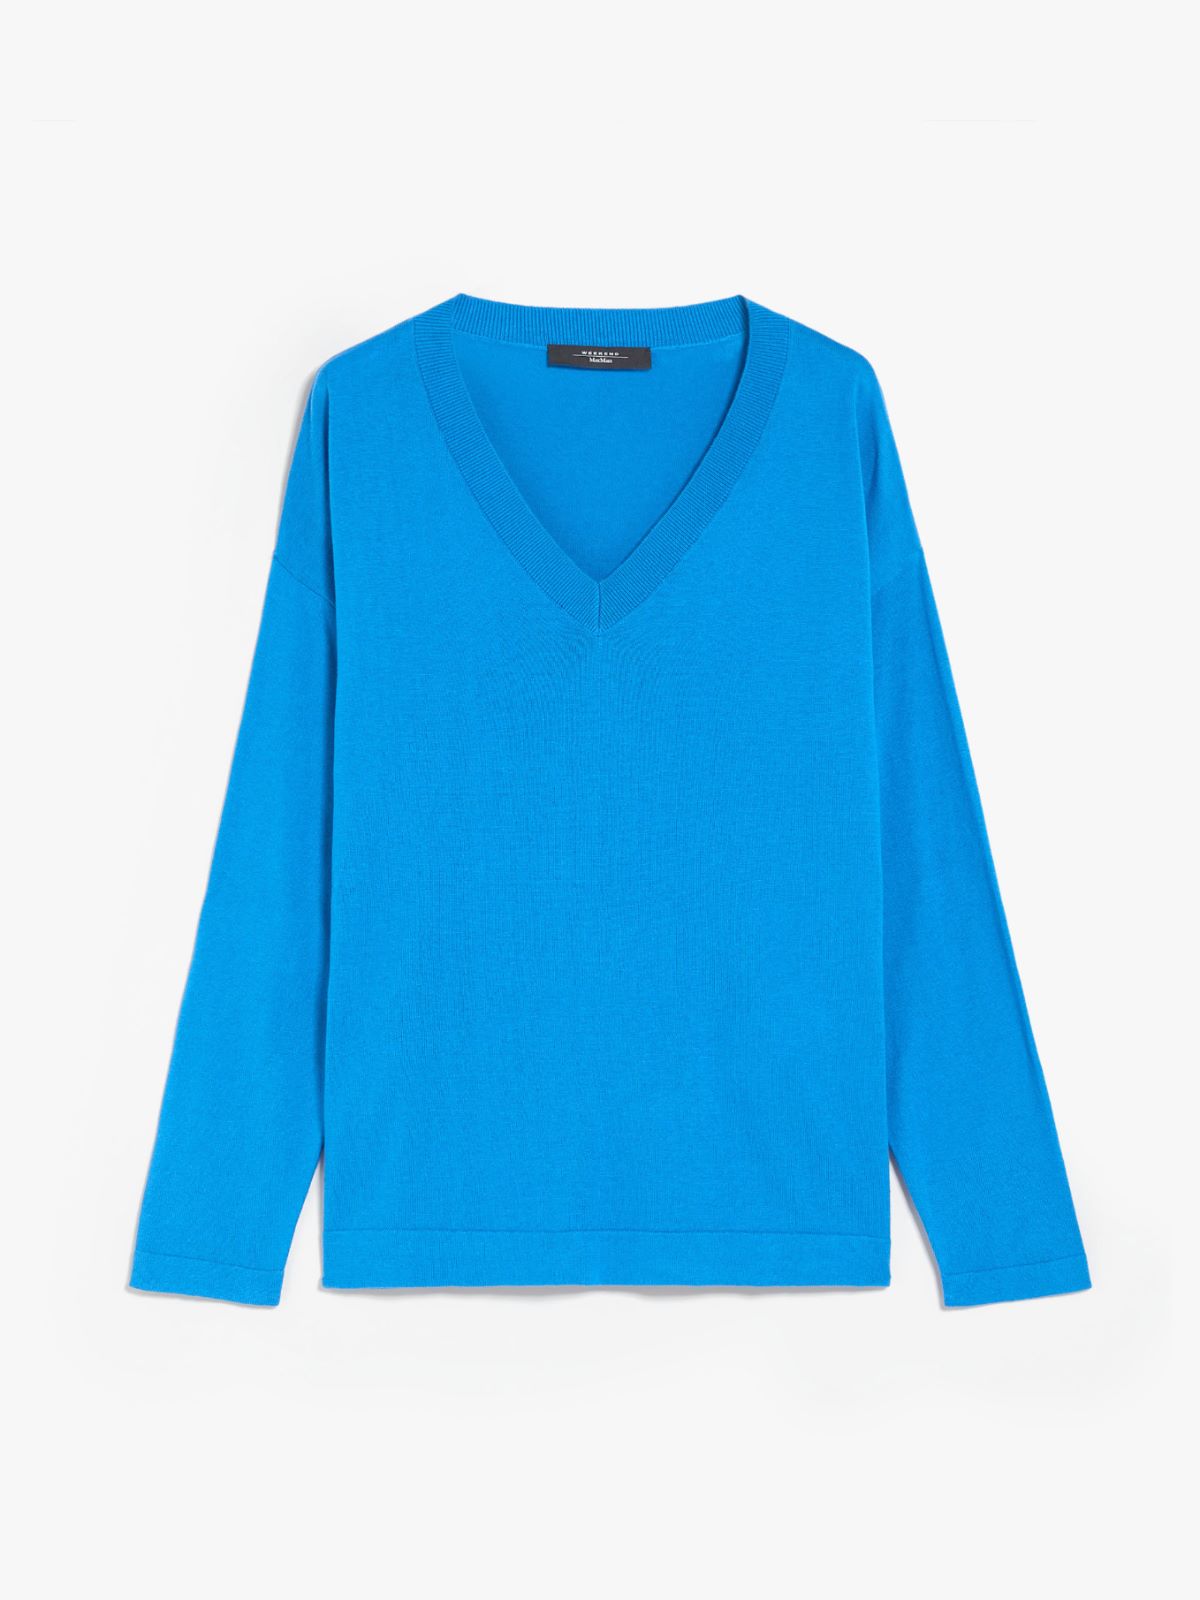 Oversized knit top in silk and cotton - CHINA BLUE - Weekend Max Mara - 6